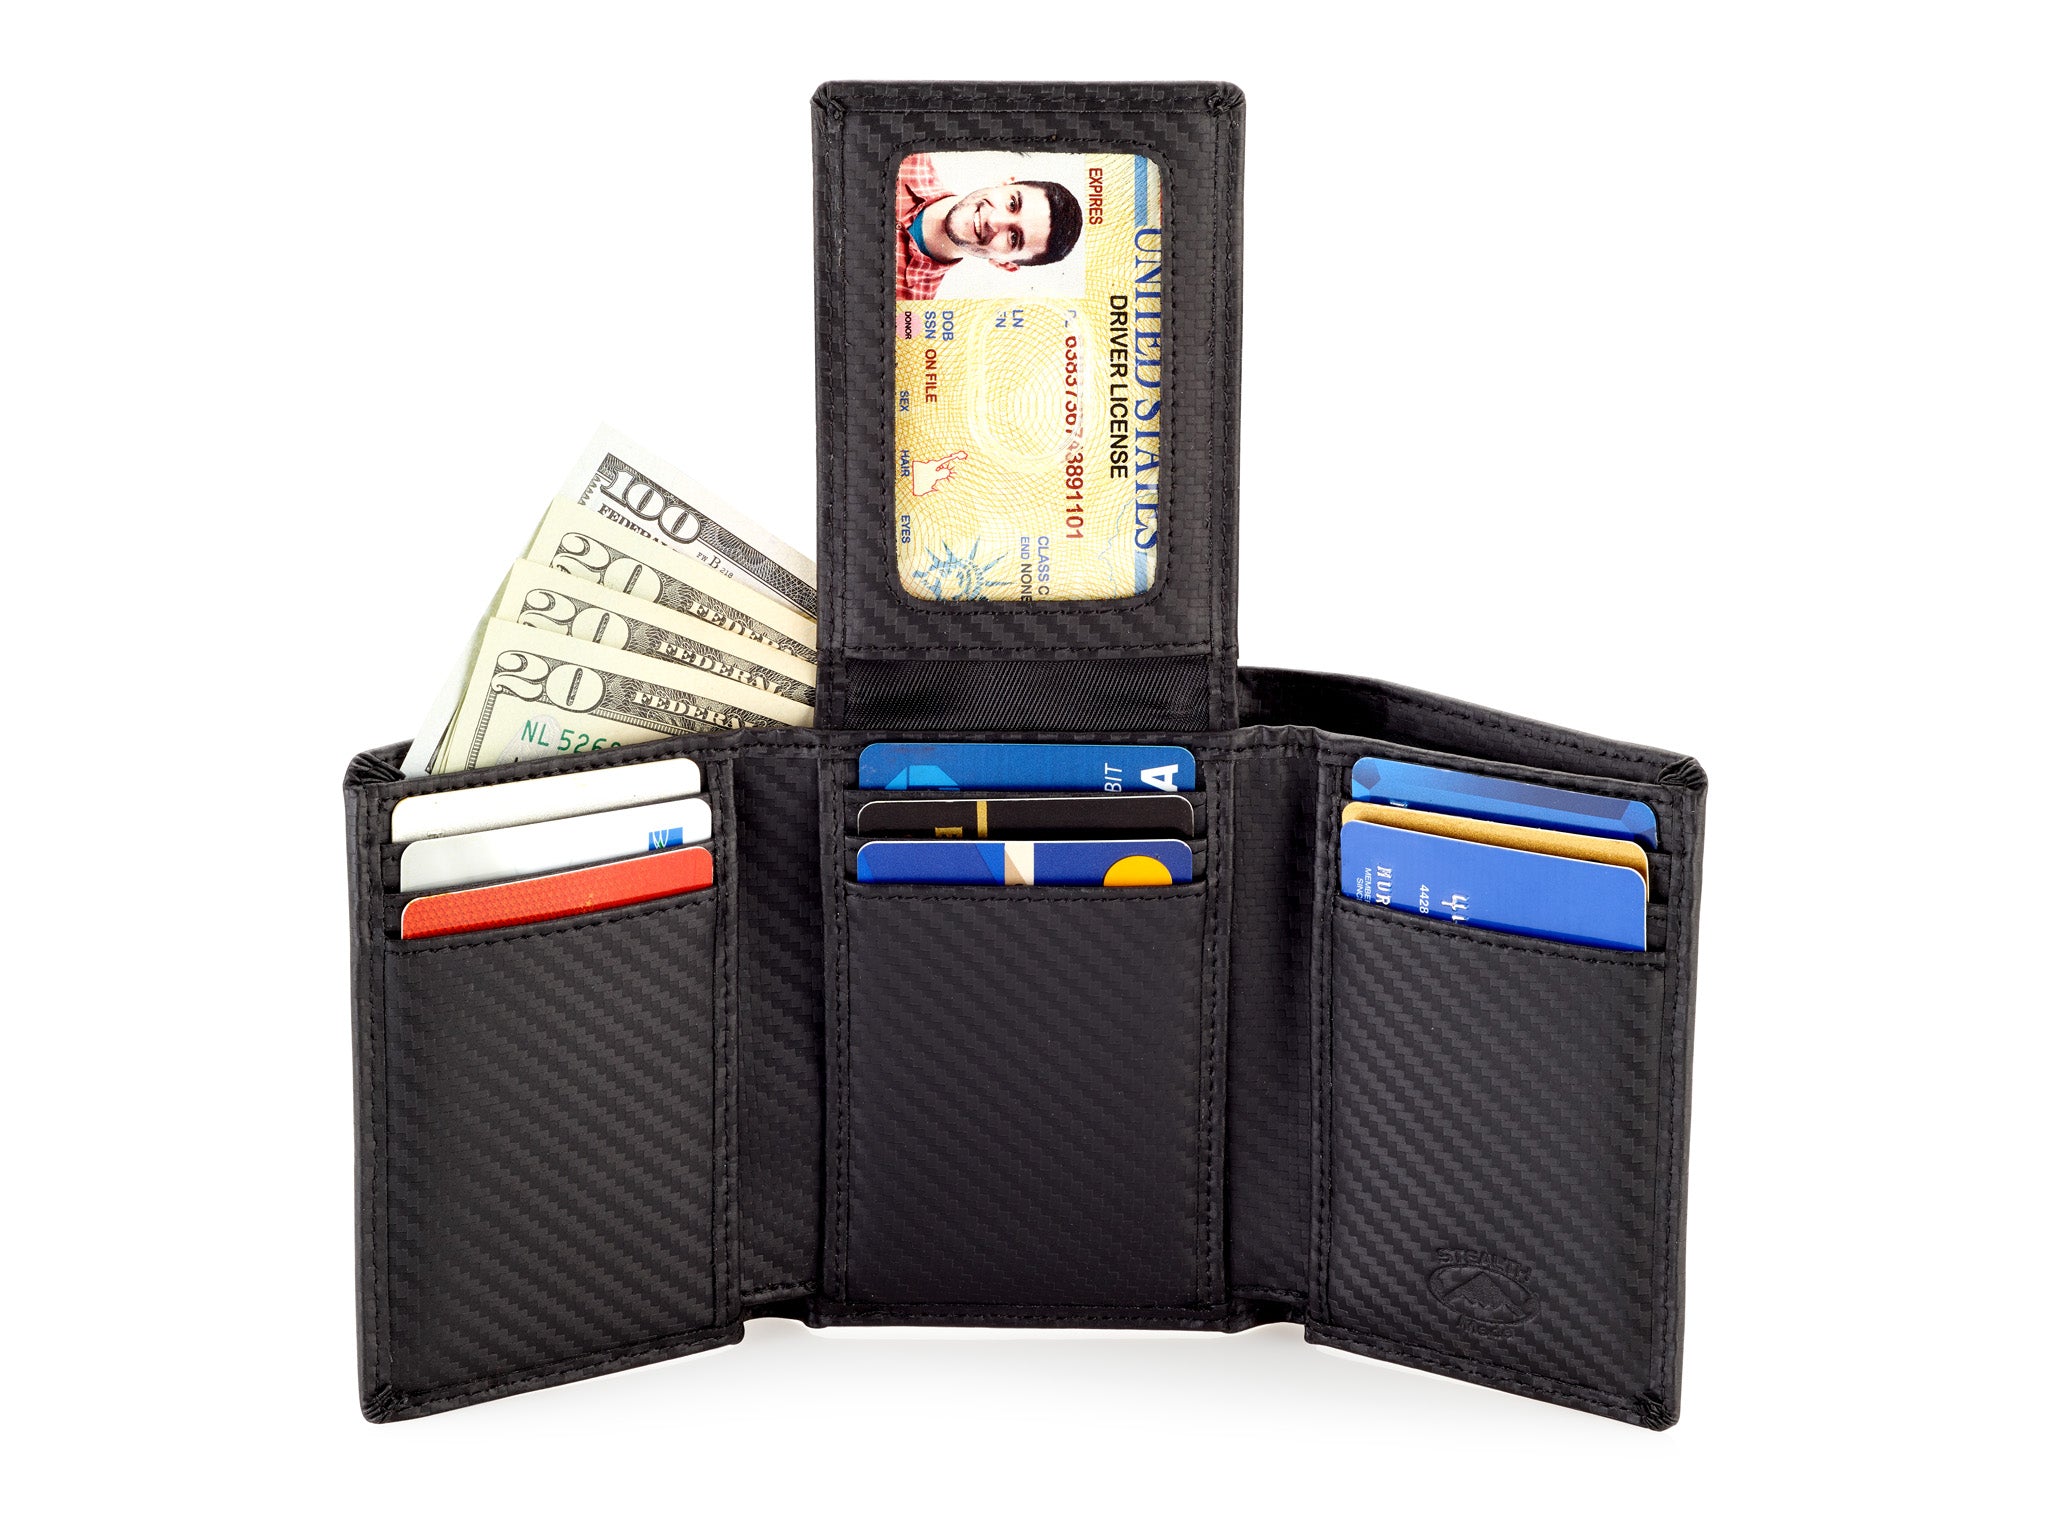 Trifold Leather Wallet for Men with ID Holder and RFID Blocking (Carbon Fiber)